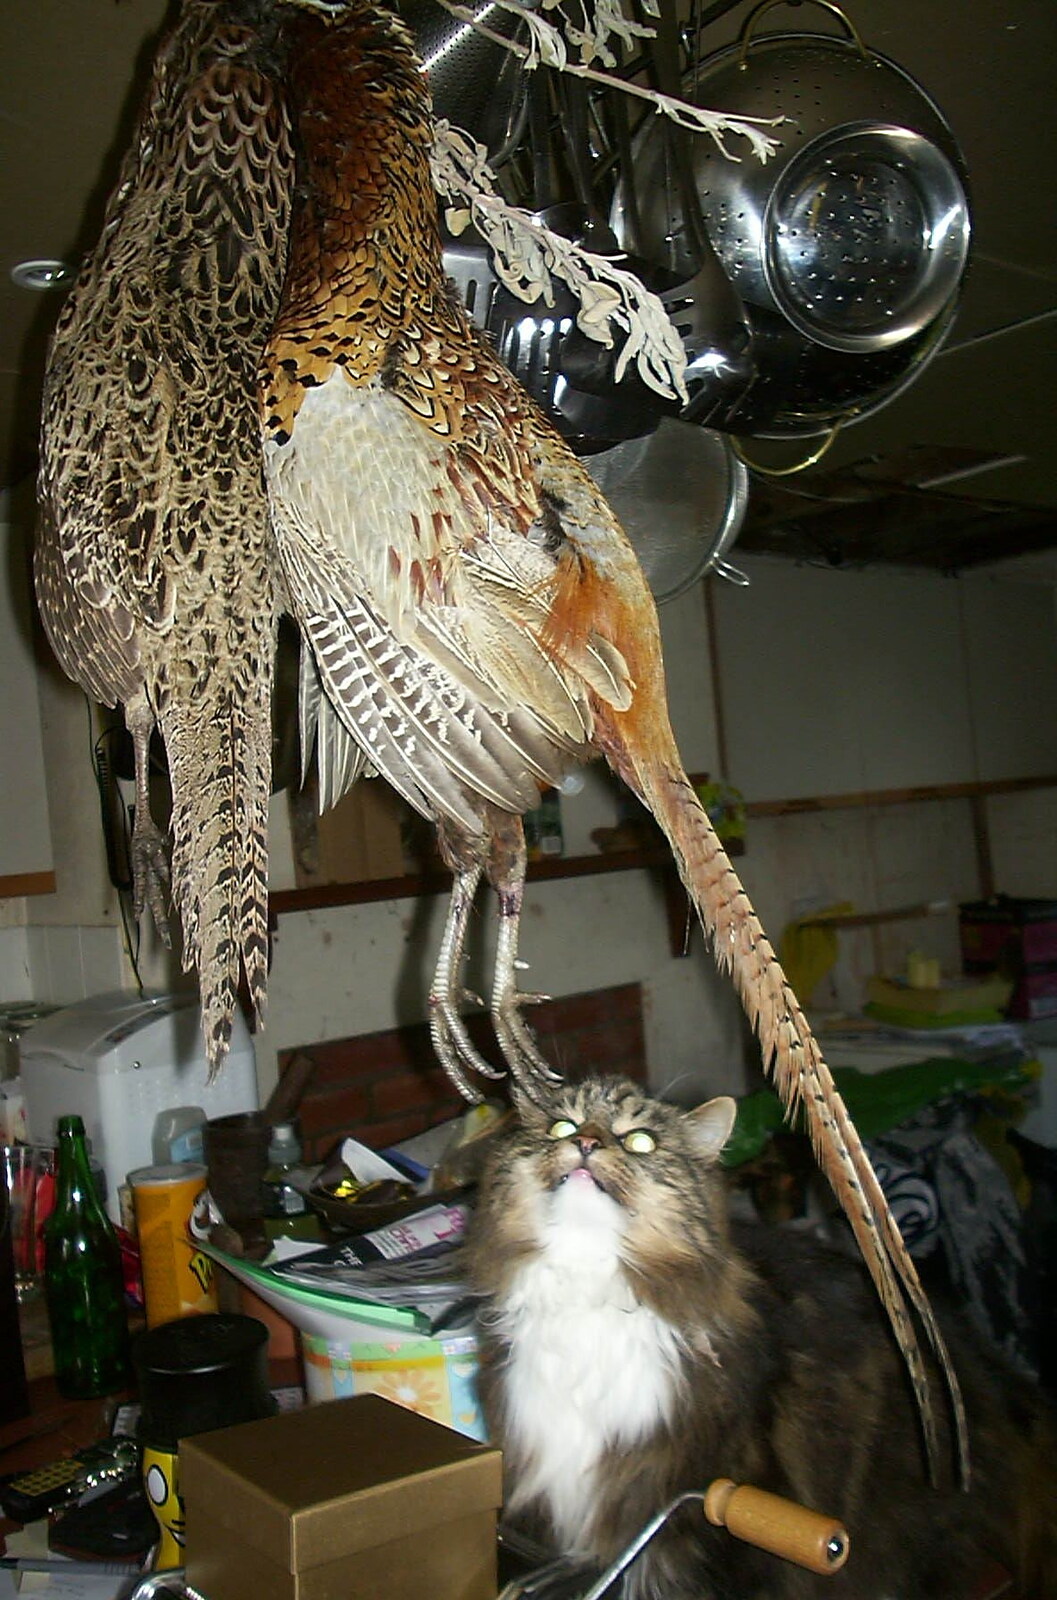 There's a brace of pheasants in the kitchen from Mother and Mike Visit, and Cat Photos, Brome, Suffolk - 1st September 2002